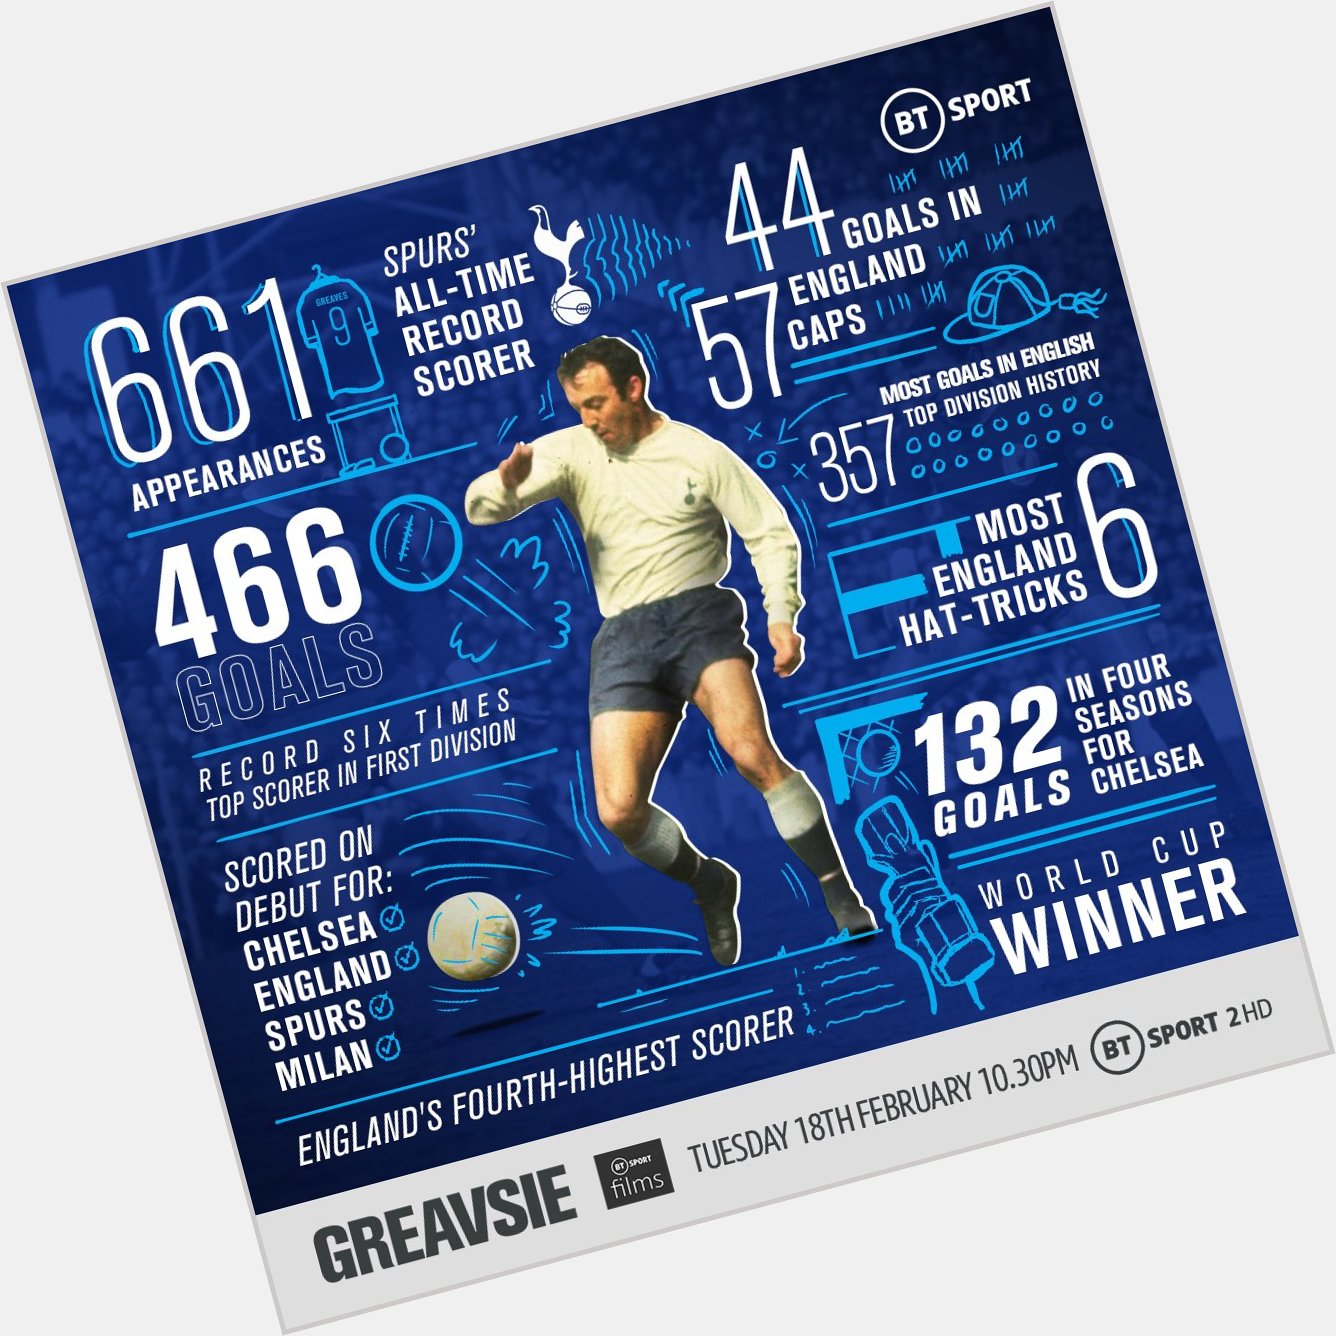 Happy 8  0  th Birthday to the one and only Jimmy Greaves!

A true legend. Those numbers   